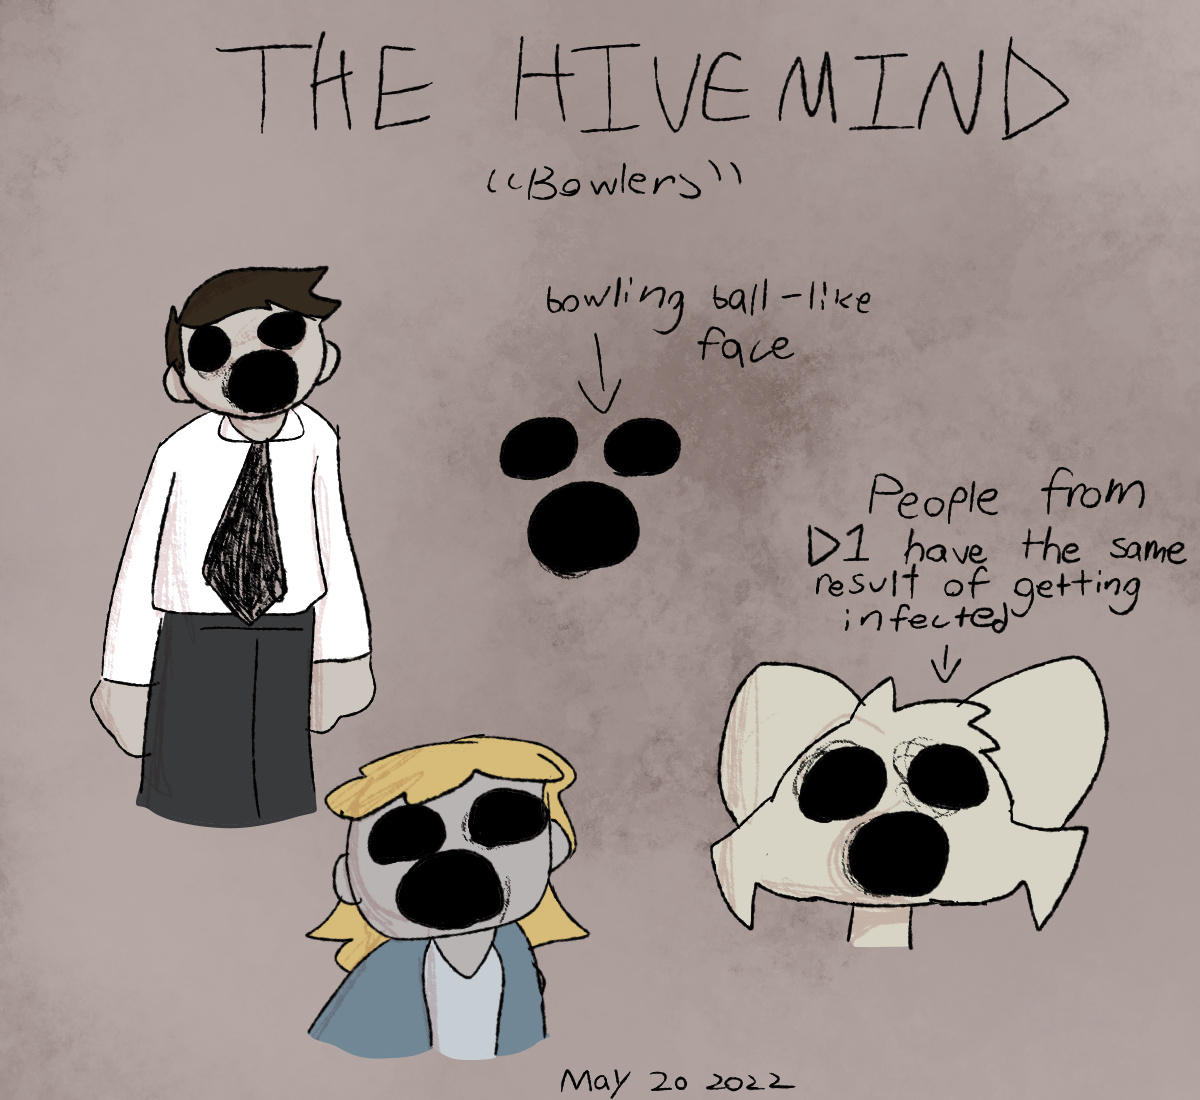 sketches of the d2 hivemind